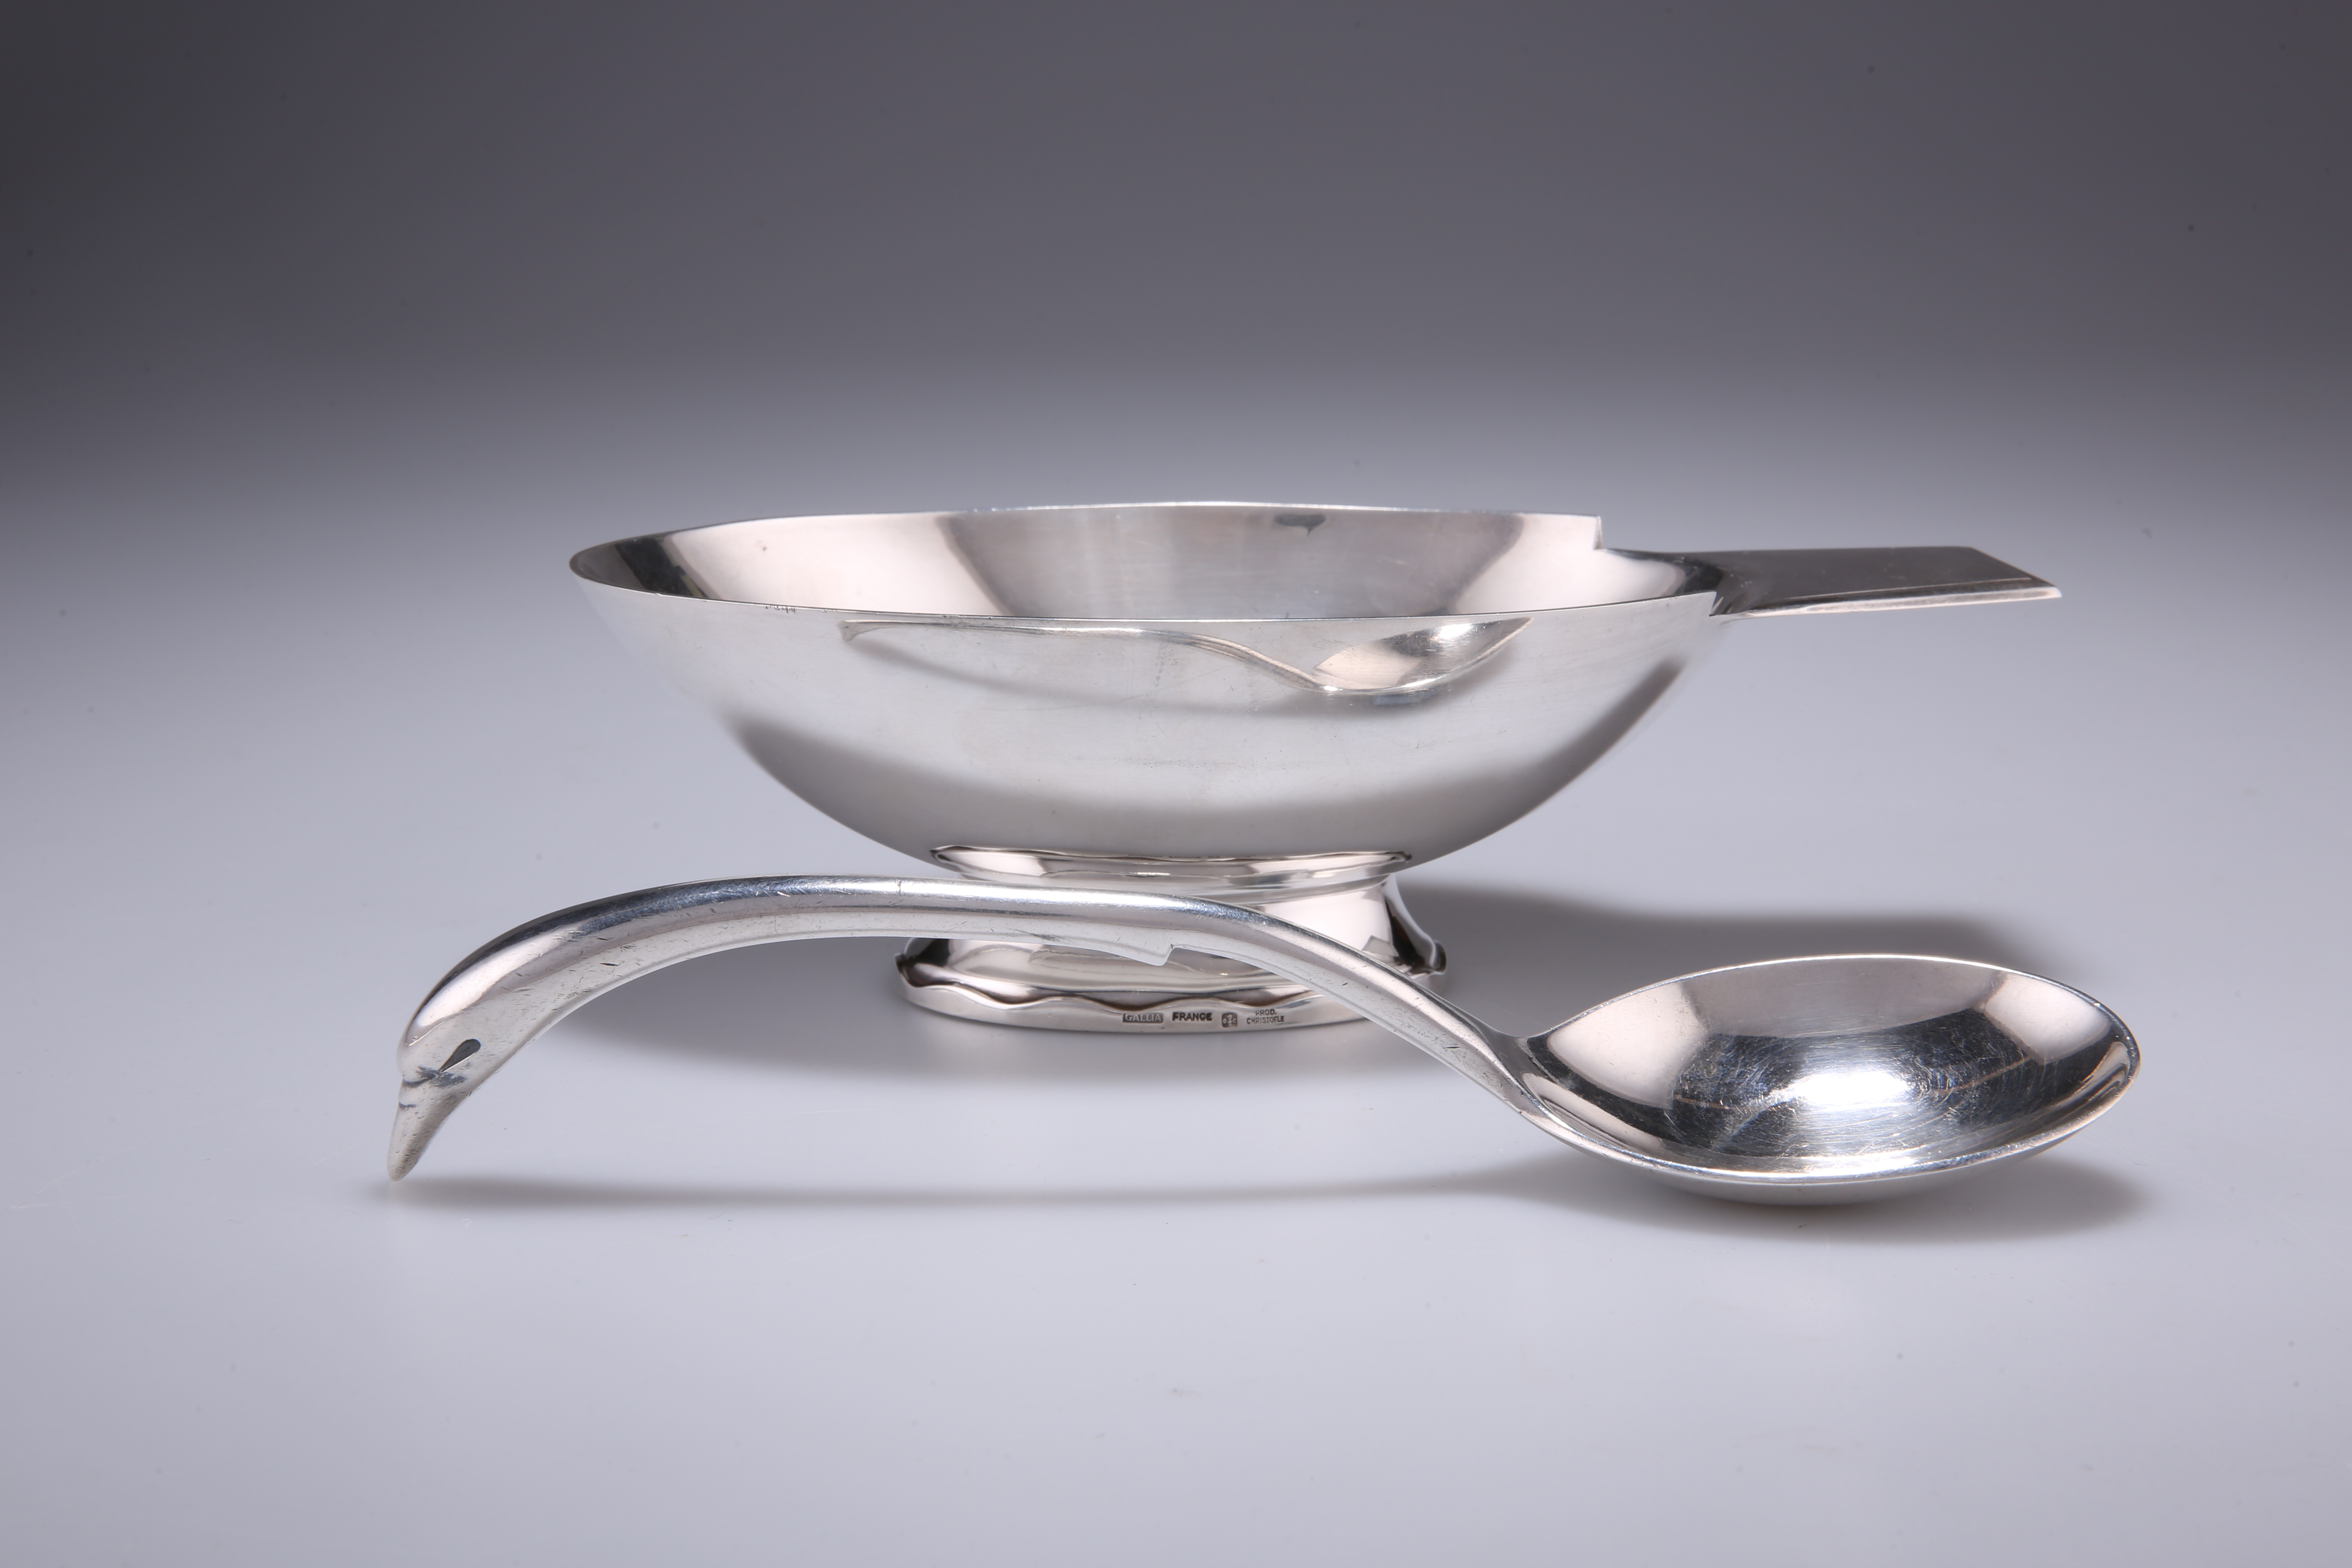 ART DECO ELECTROPLATED GALLIA 'SWAN' SAUCE DISH AND SPOON - Image 2 of 2